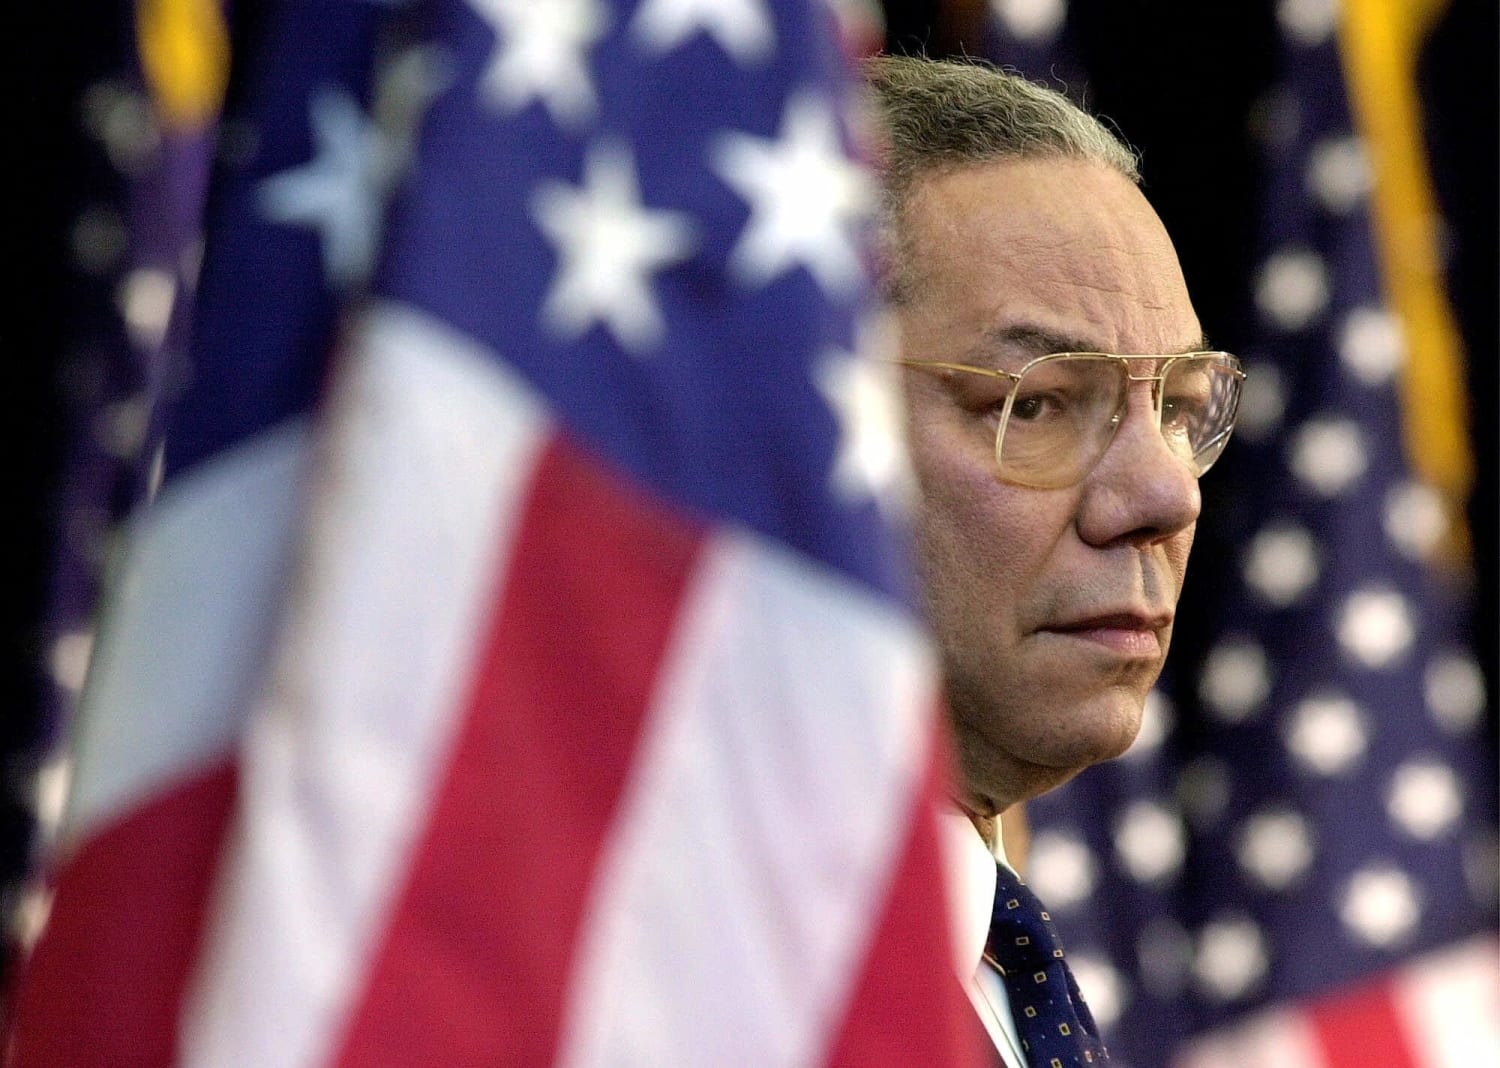 Trump admonishes Colin Powell the day after his death